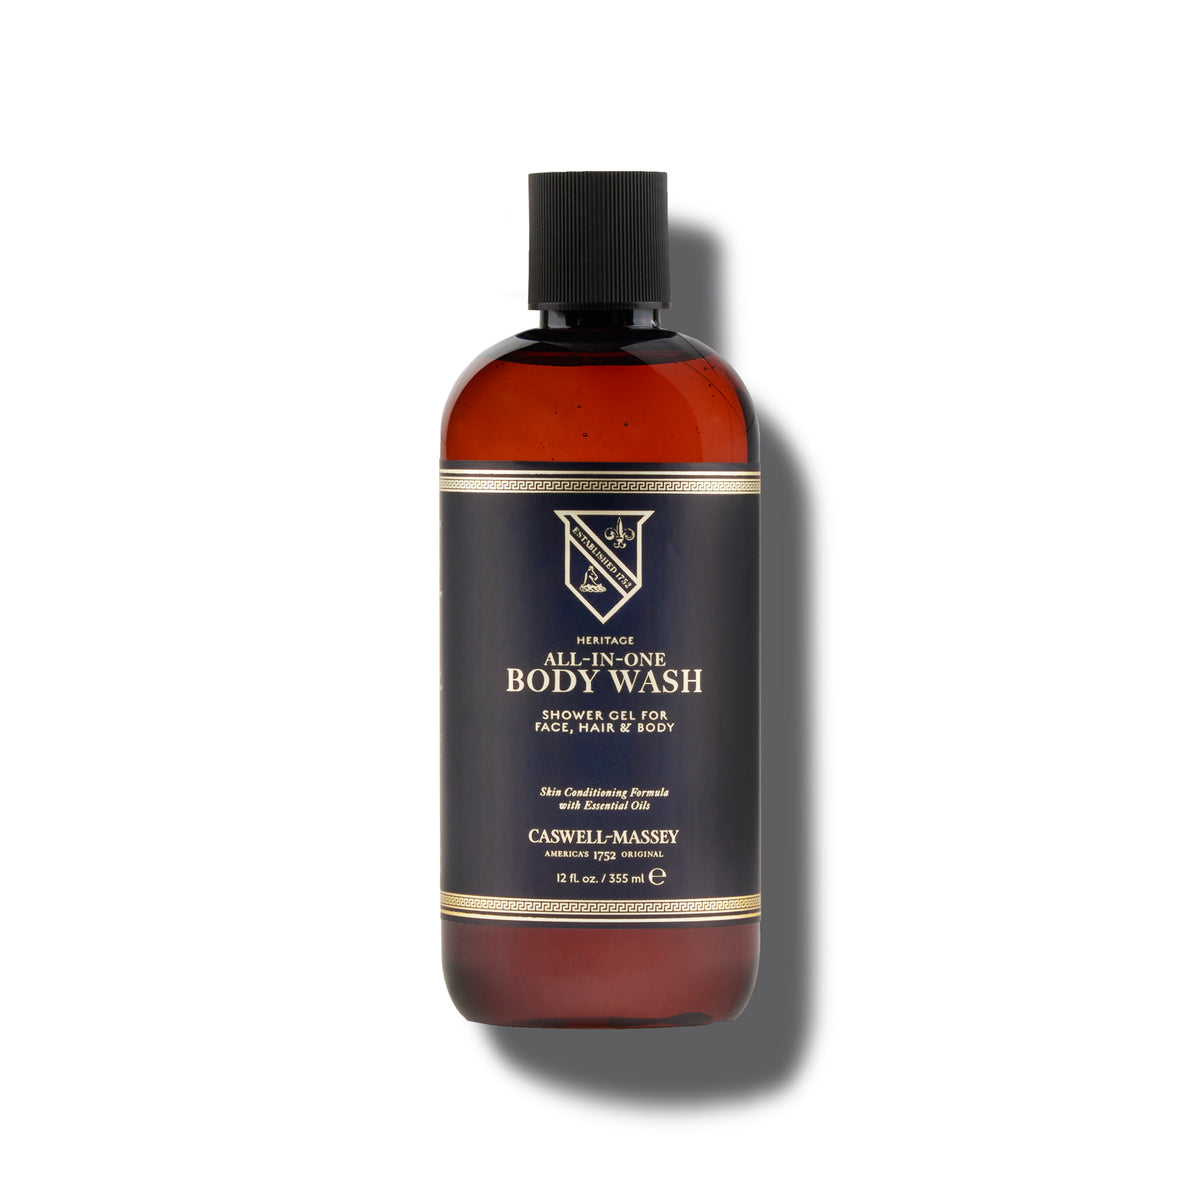 Heritage All-In-One Body Wash-12 oz.